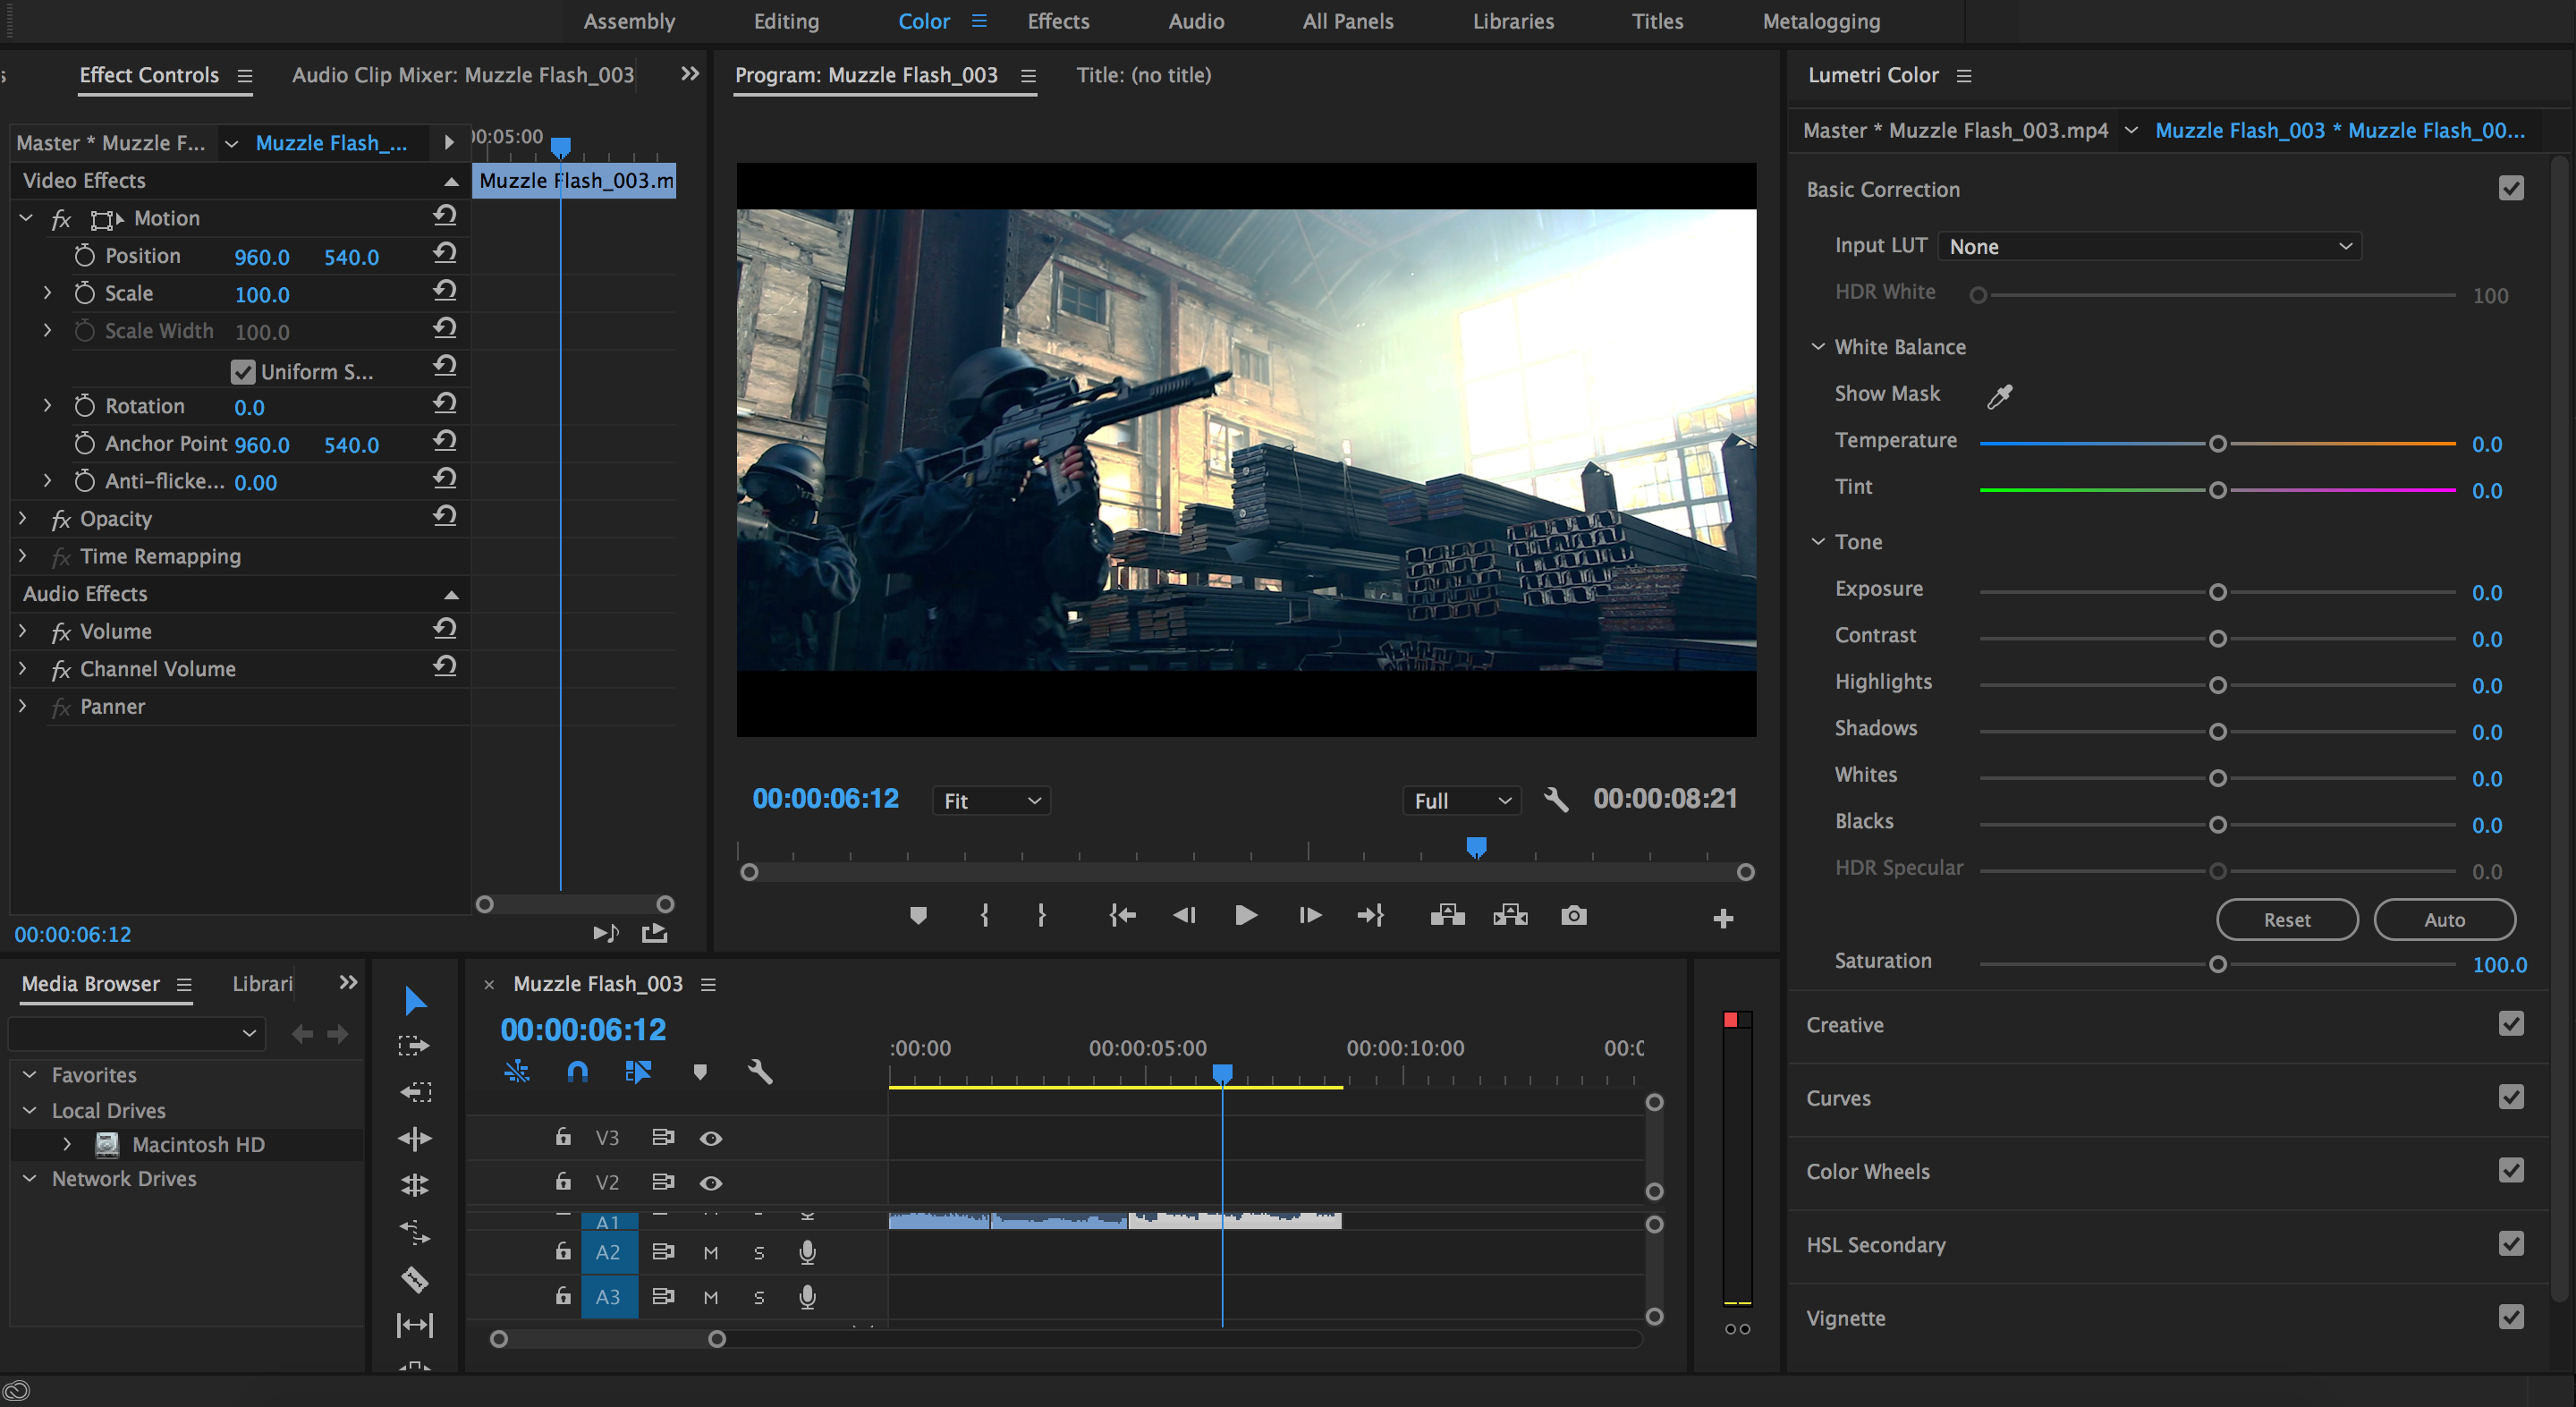 The Best Color Grading Software and Plugins for Video Editors - Premiere Pro Lumetri